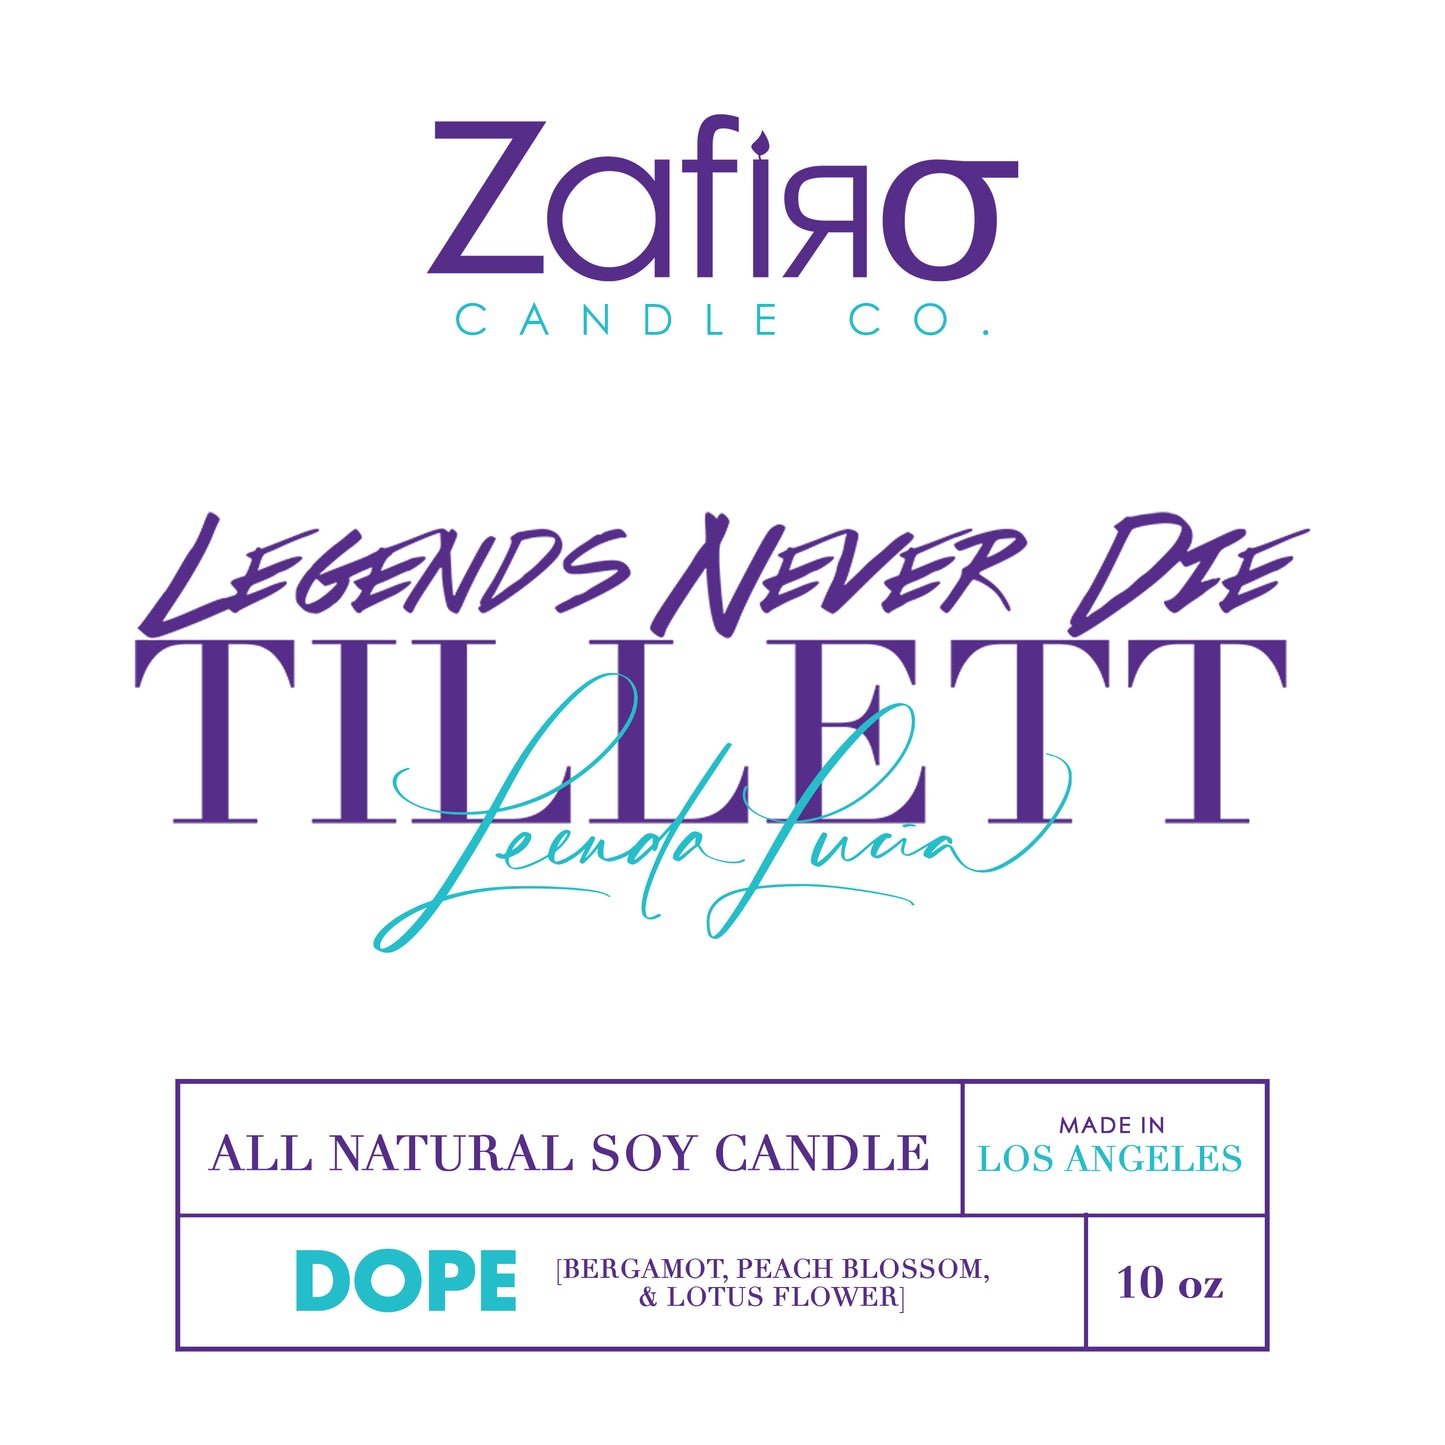 LEGENDS NEVER DIE 'DOPE' CANDLE